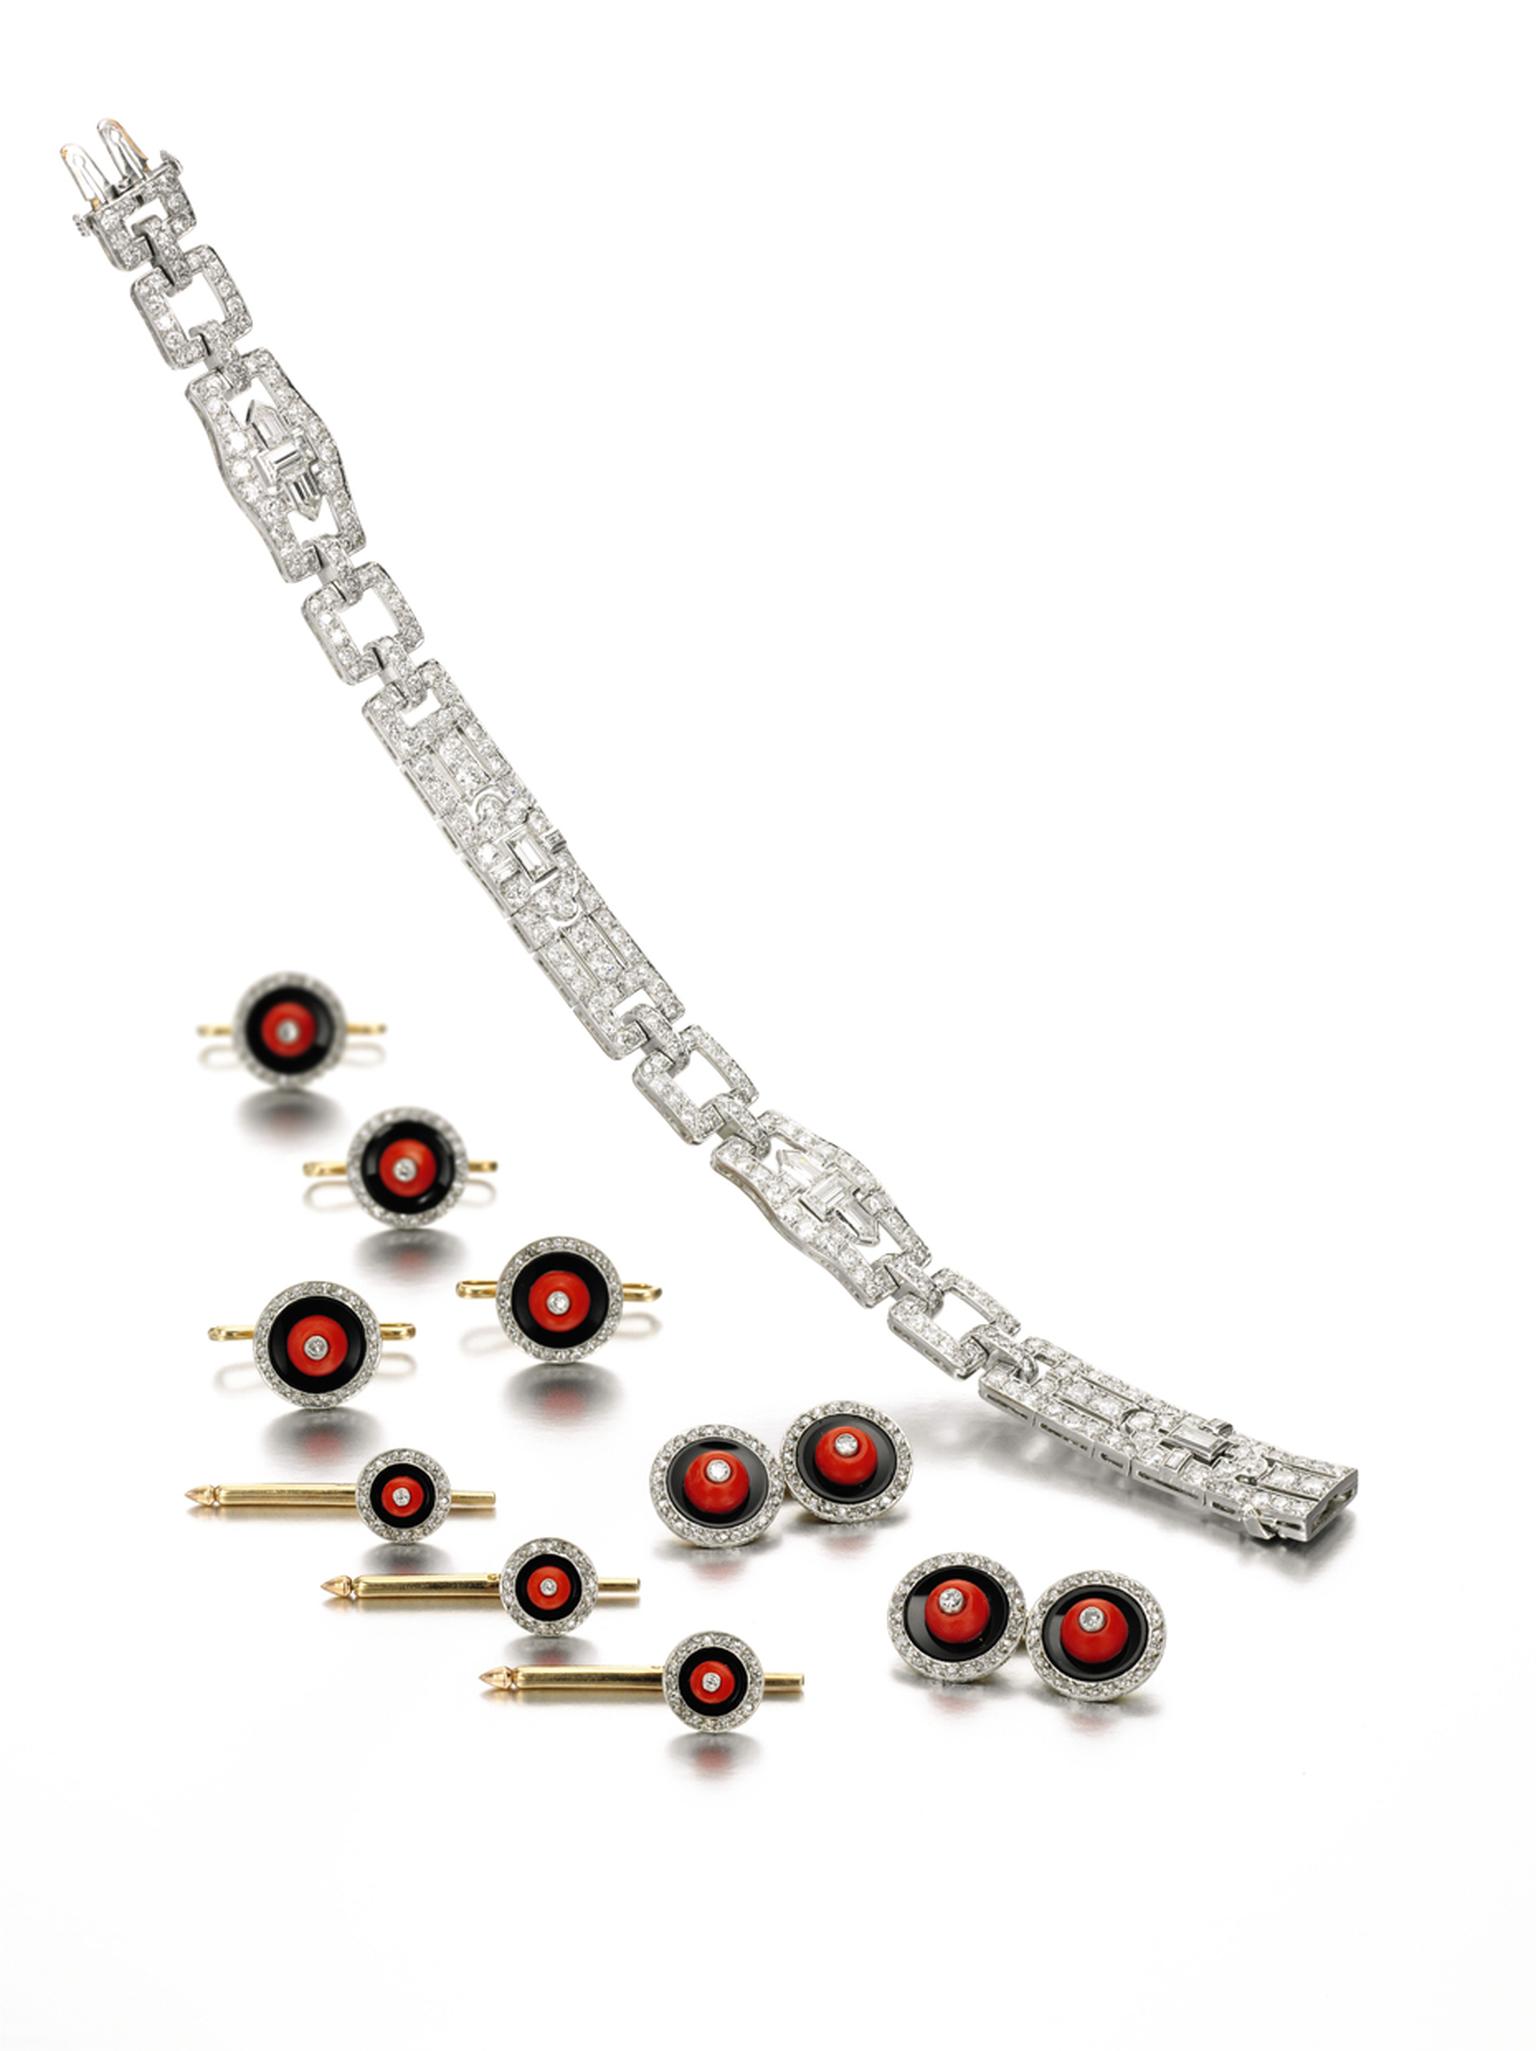 This Raymond Yard coral, onyx and diamond dress set sold for £13,750 and 1920s Cartier diamond bracelet sold for £31,250 at Sotheby's London in 2014.